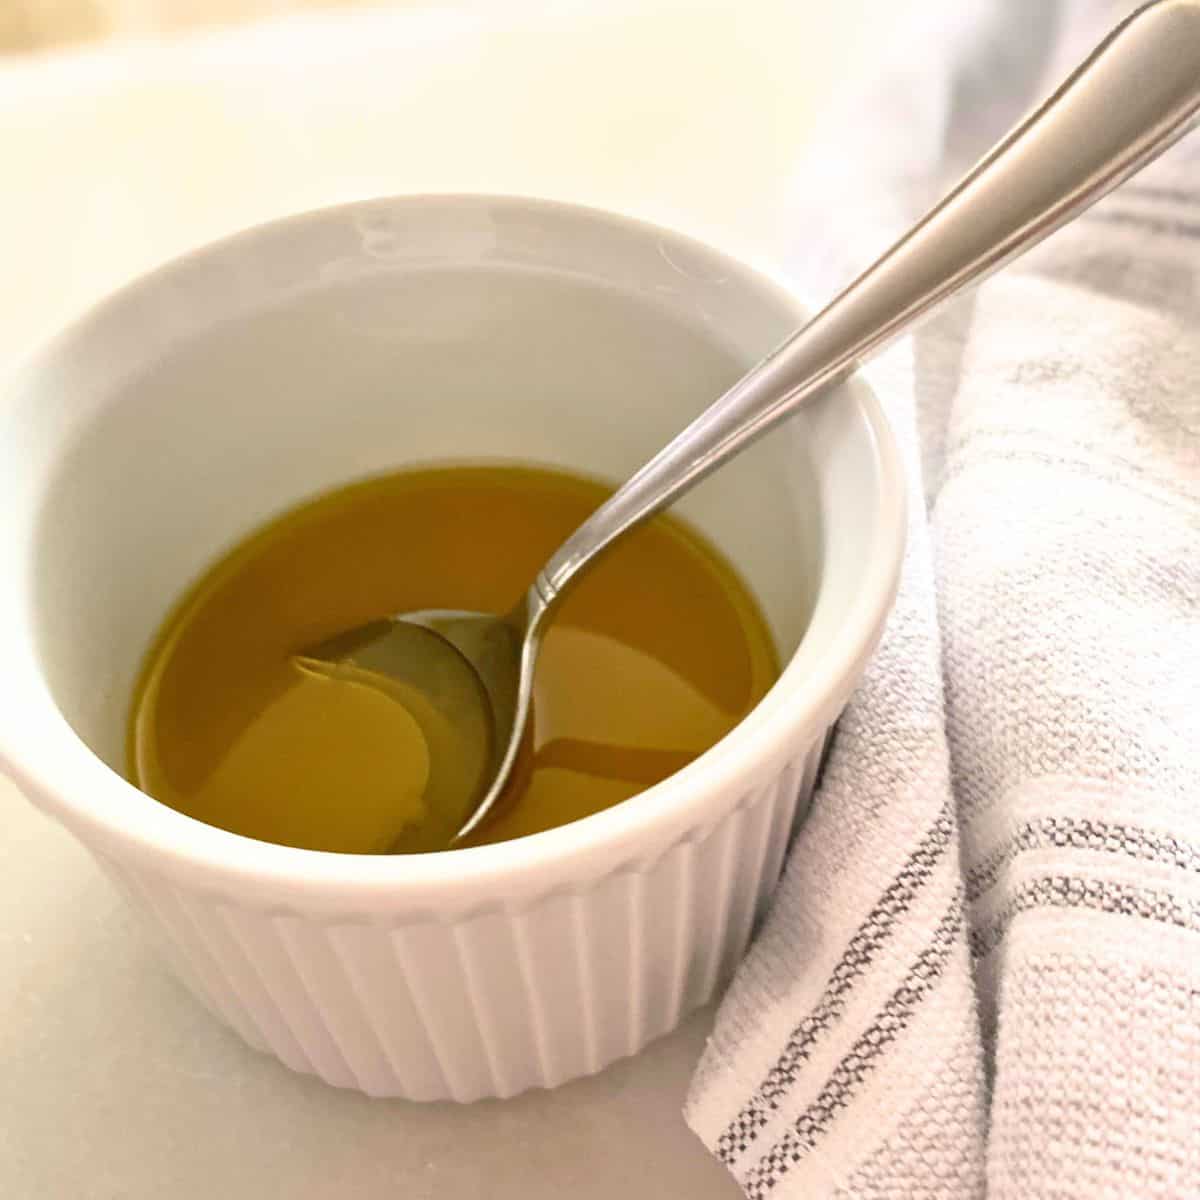 Lemon olive oil dressing in a white ramekin with a stainless steel soup spoon